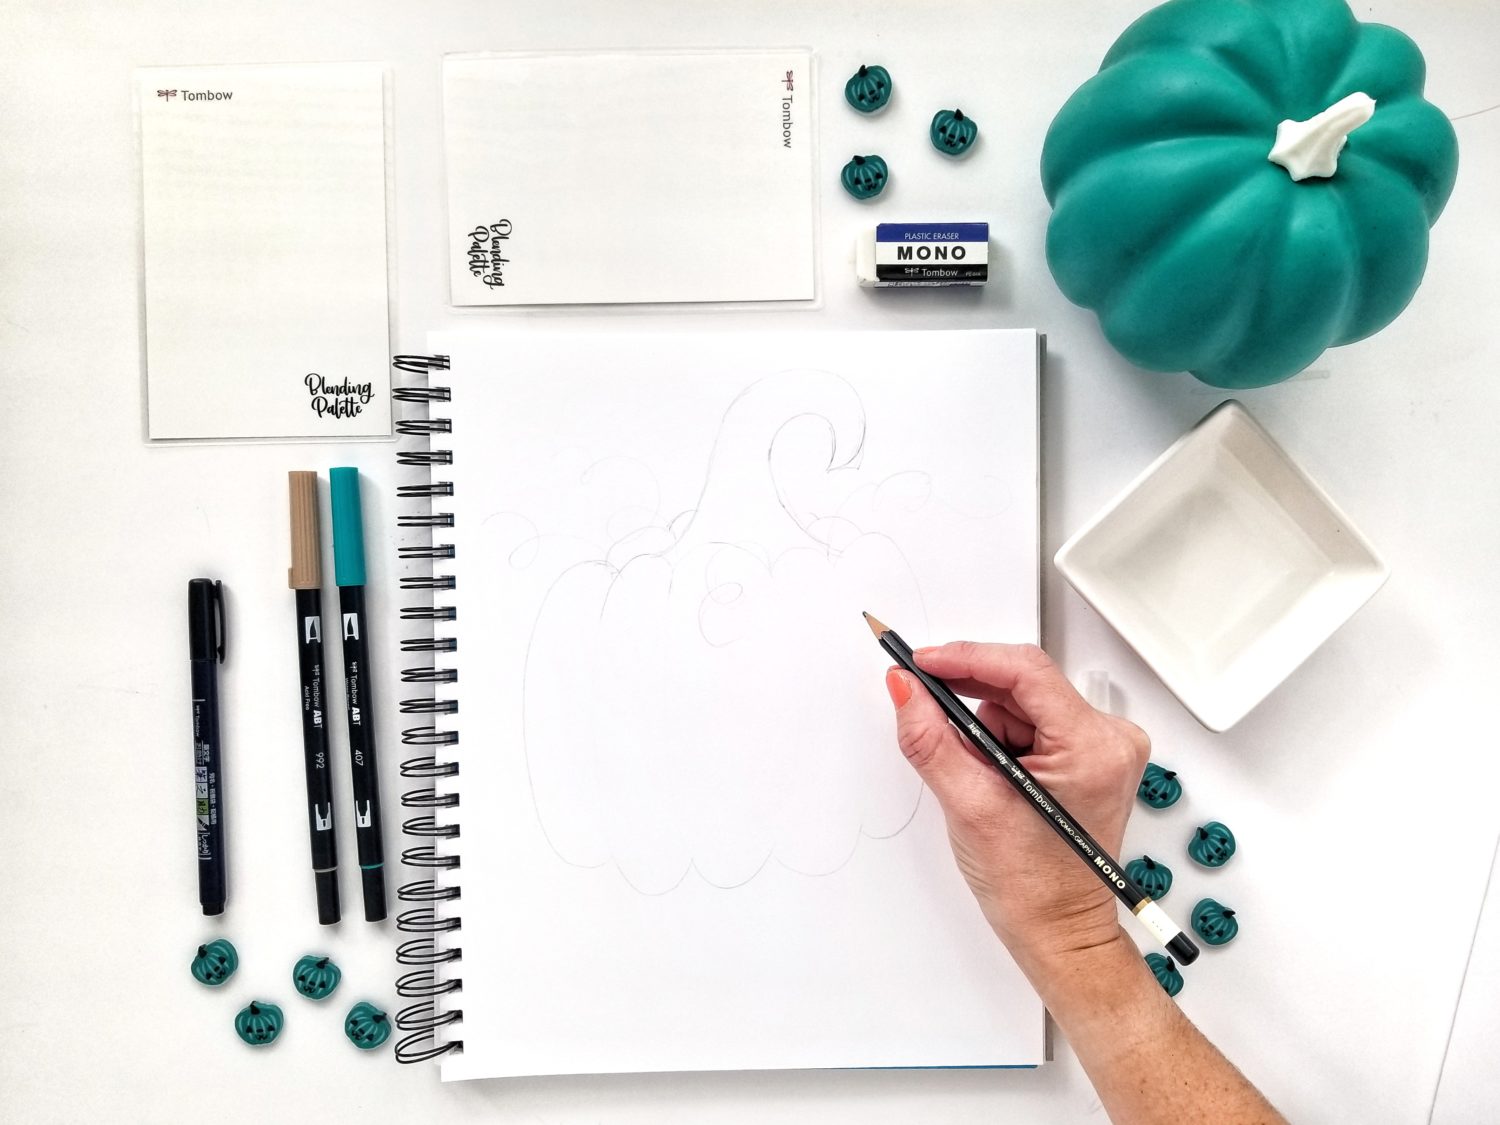 Create a Teal Pumpkin sign using @tombowusa Dual Brush Pens, and let trick-or-treaters know you have non-food treats available! By @graceannestudio.